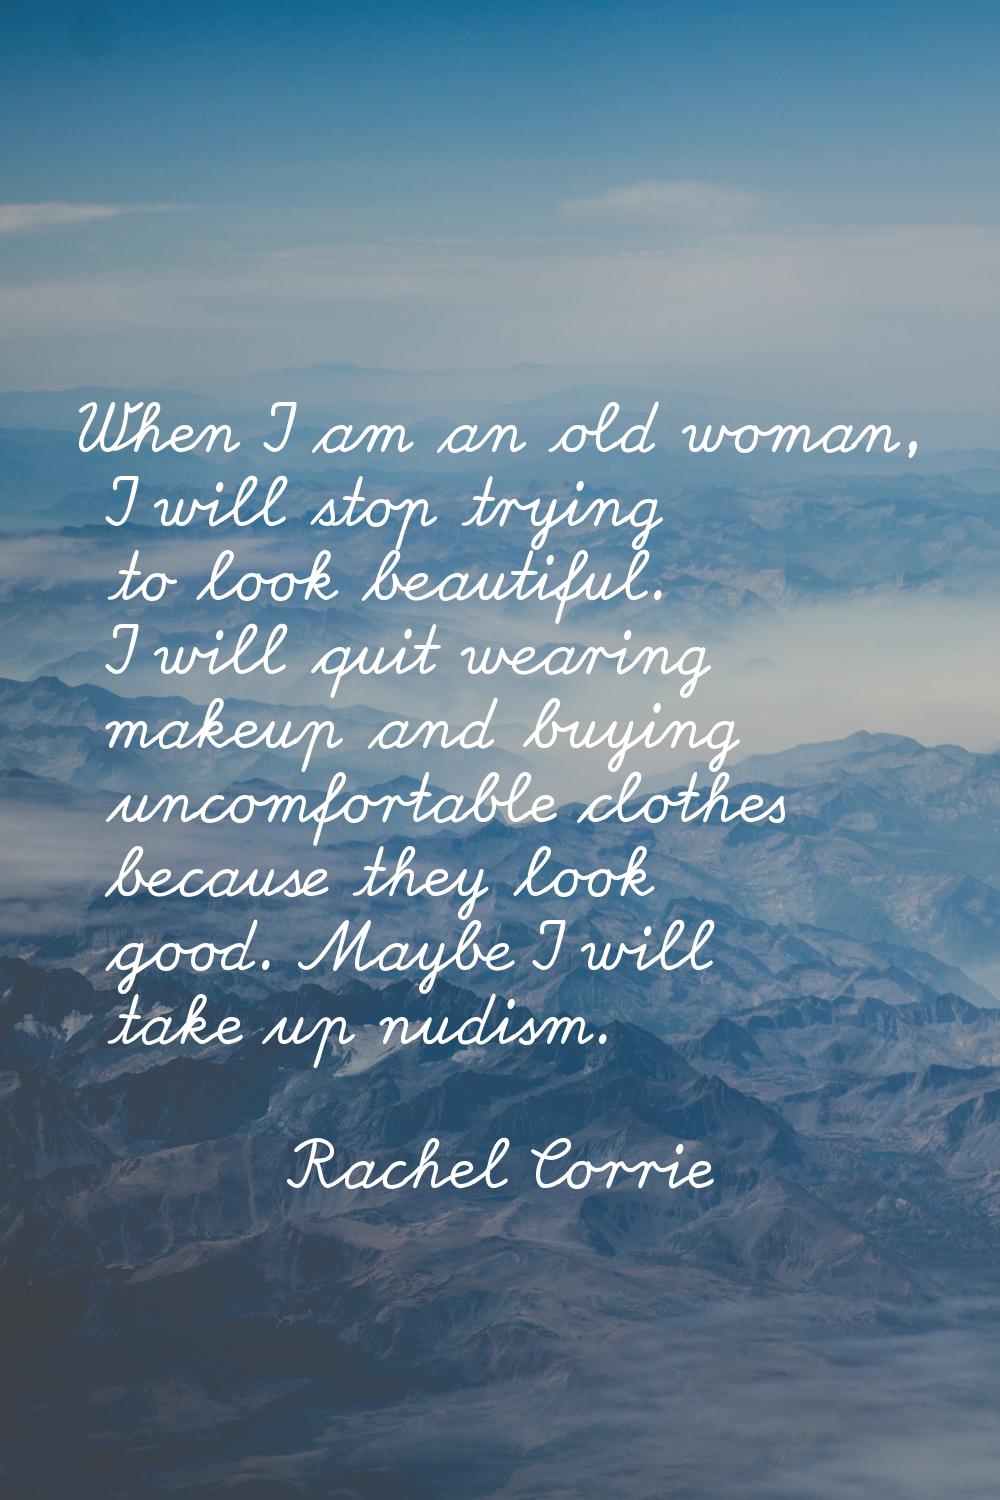 When I am an old woman, I will stop trying to look beautiful. I will quit wearing makeup and buying